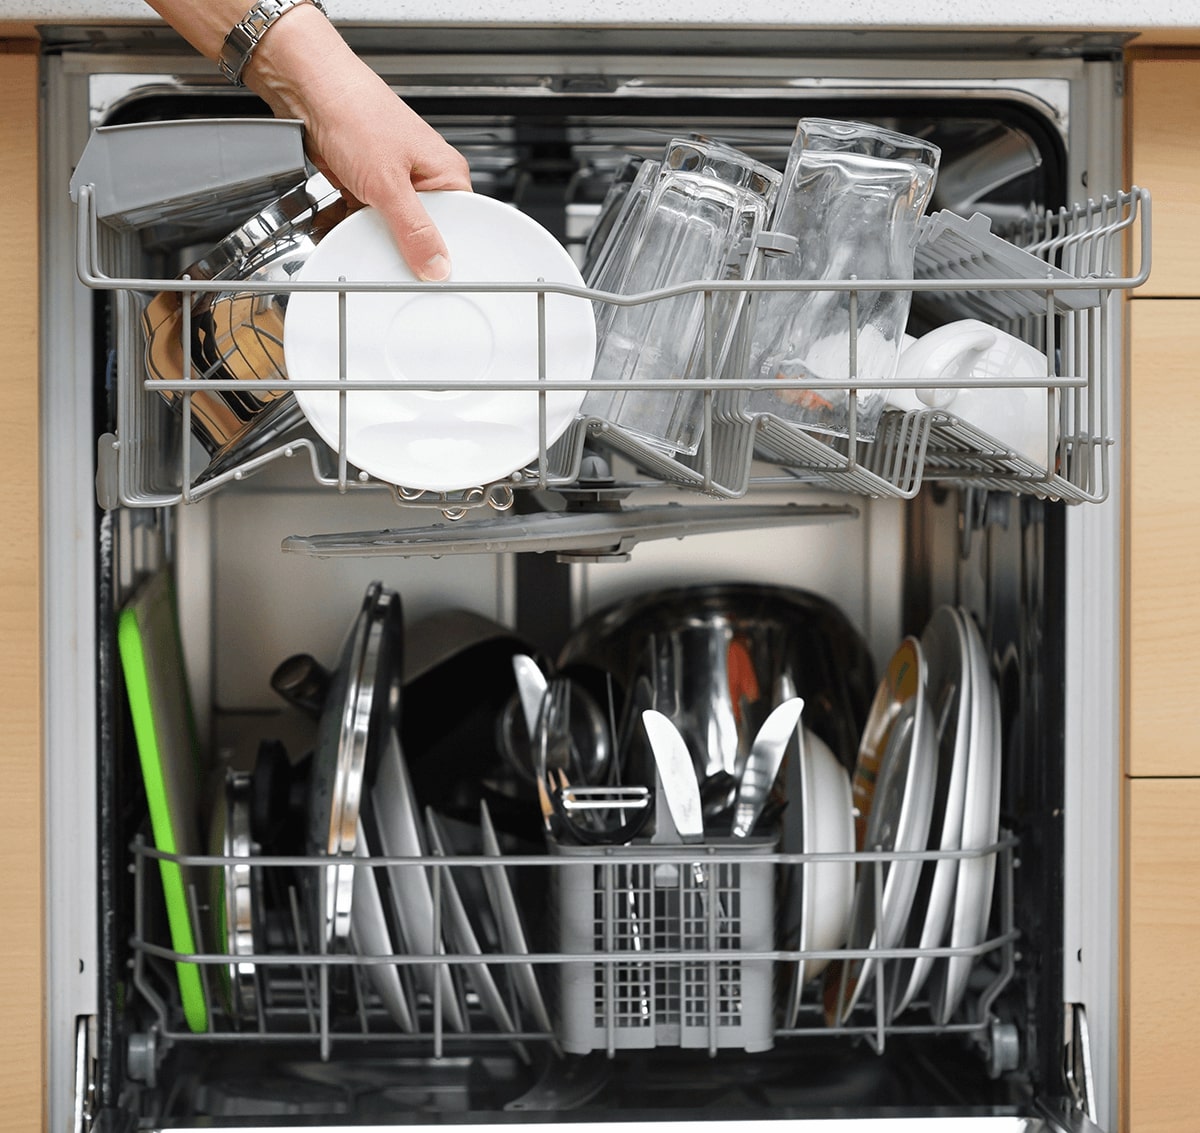 hand putting dishes in a dishwasher. the fishwasher is open and filled with cutlery and culnery